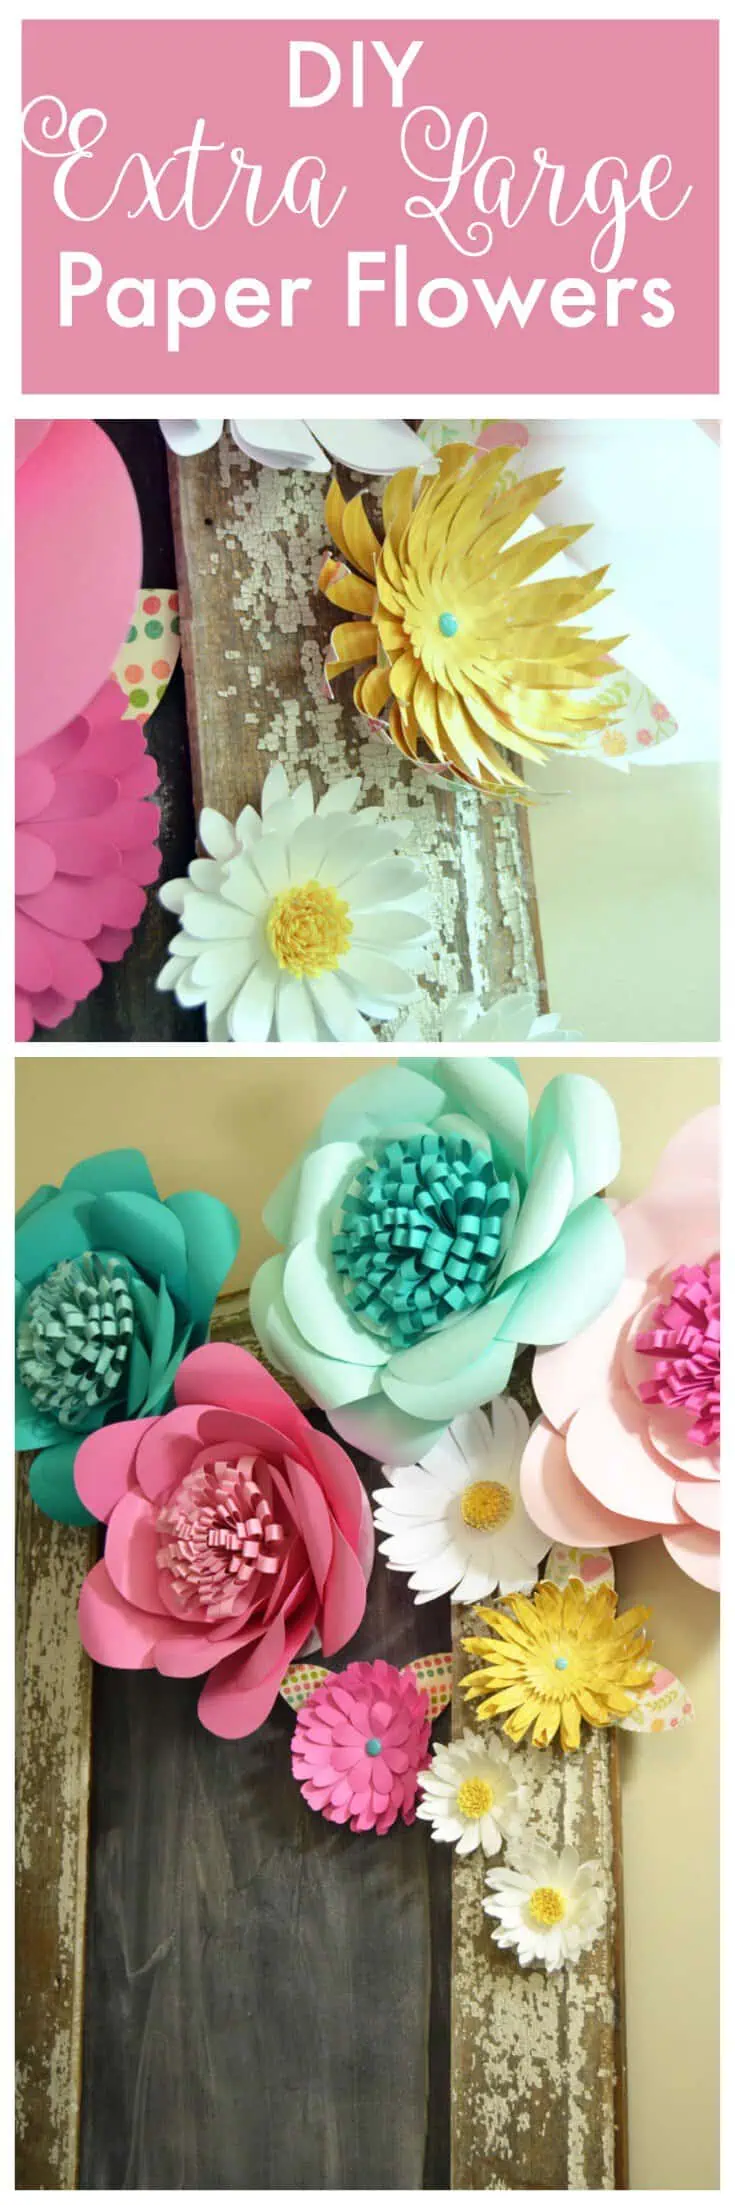 DIY Extra Large Paper Flowers